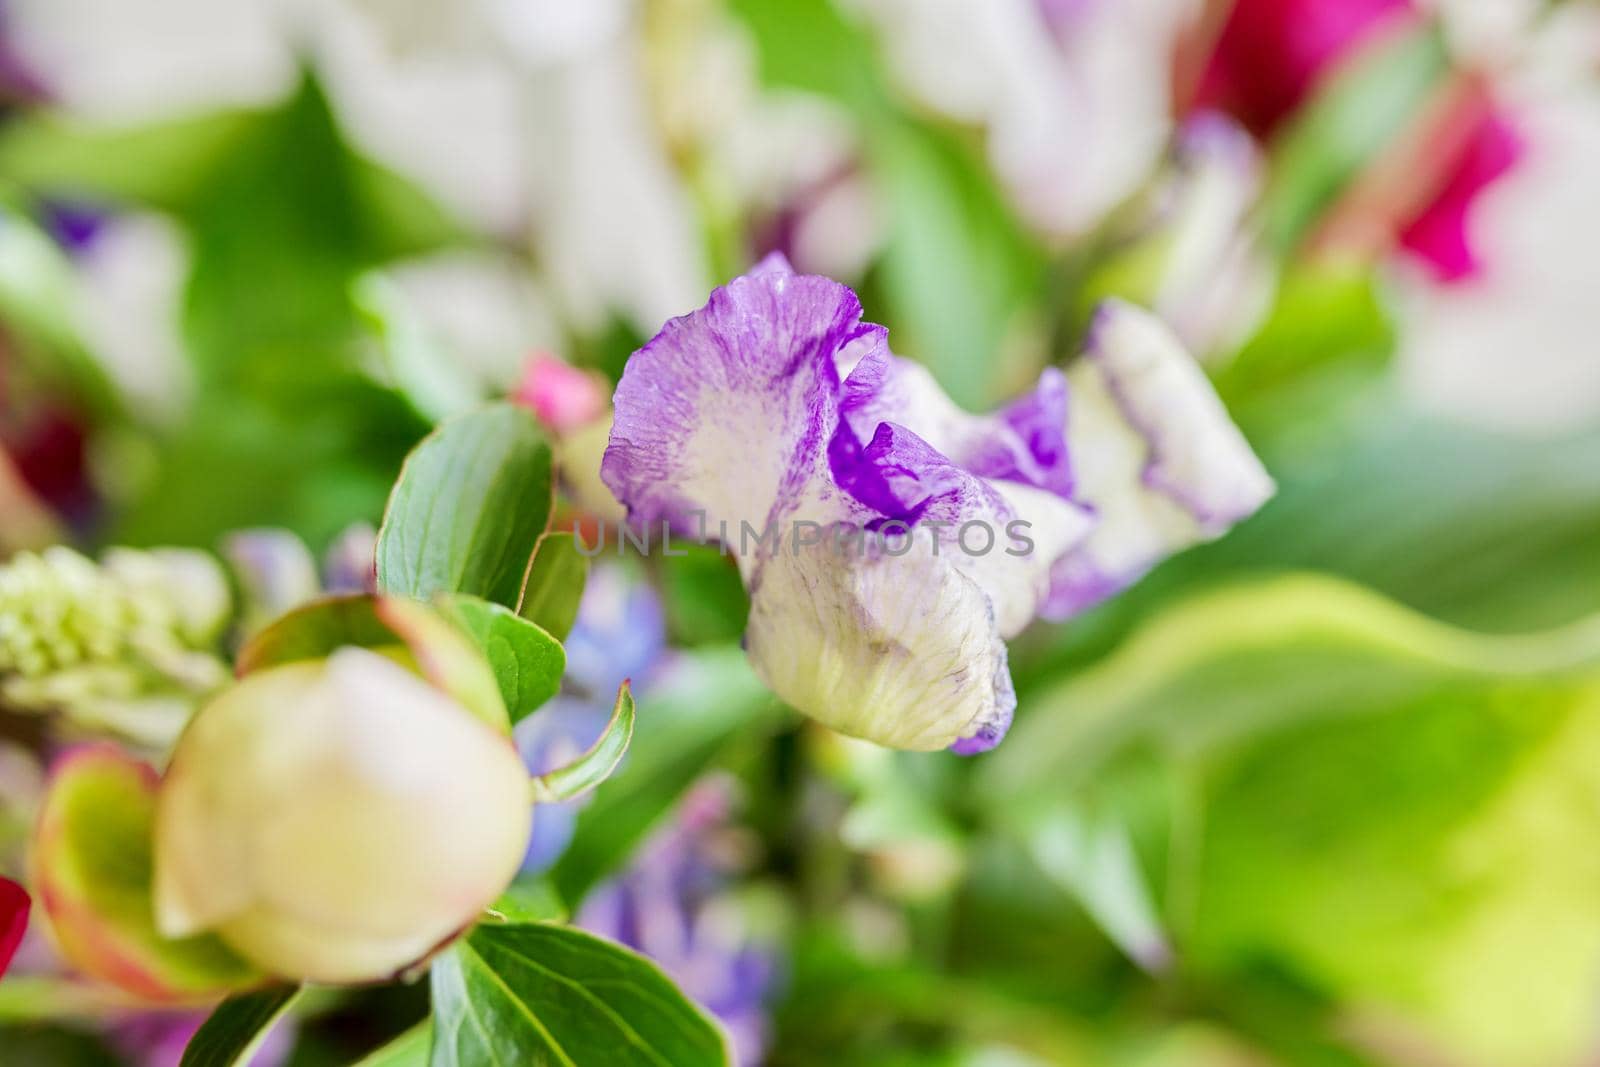 Abstract multicolored floral background texture, close-up flowers and buds peonies irises lupine in defocus, season spring summer, natural beauty, background image